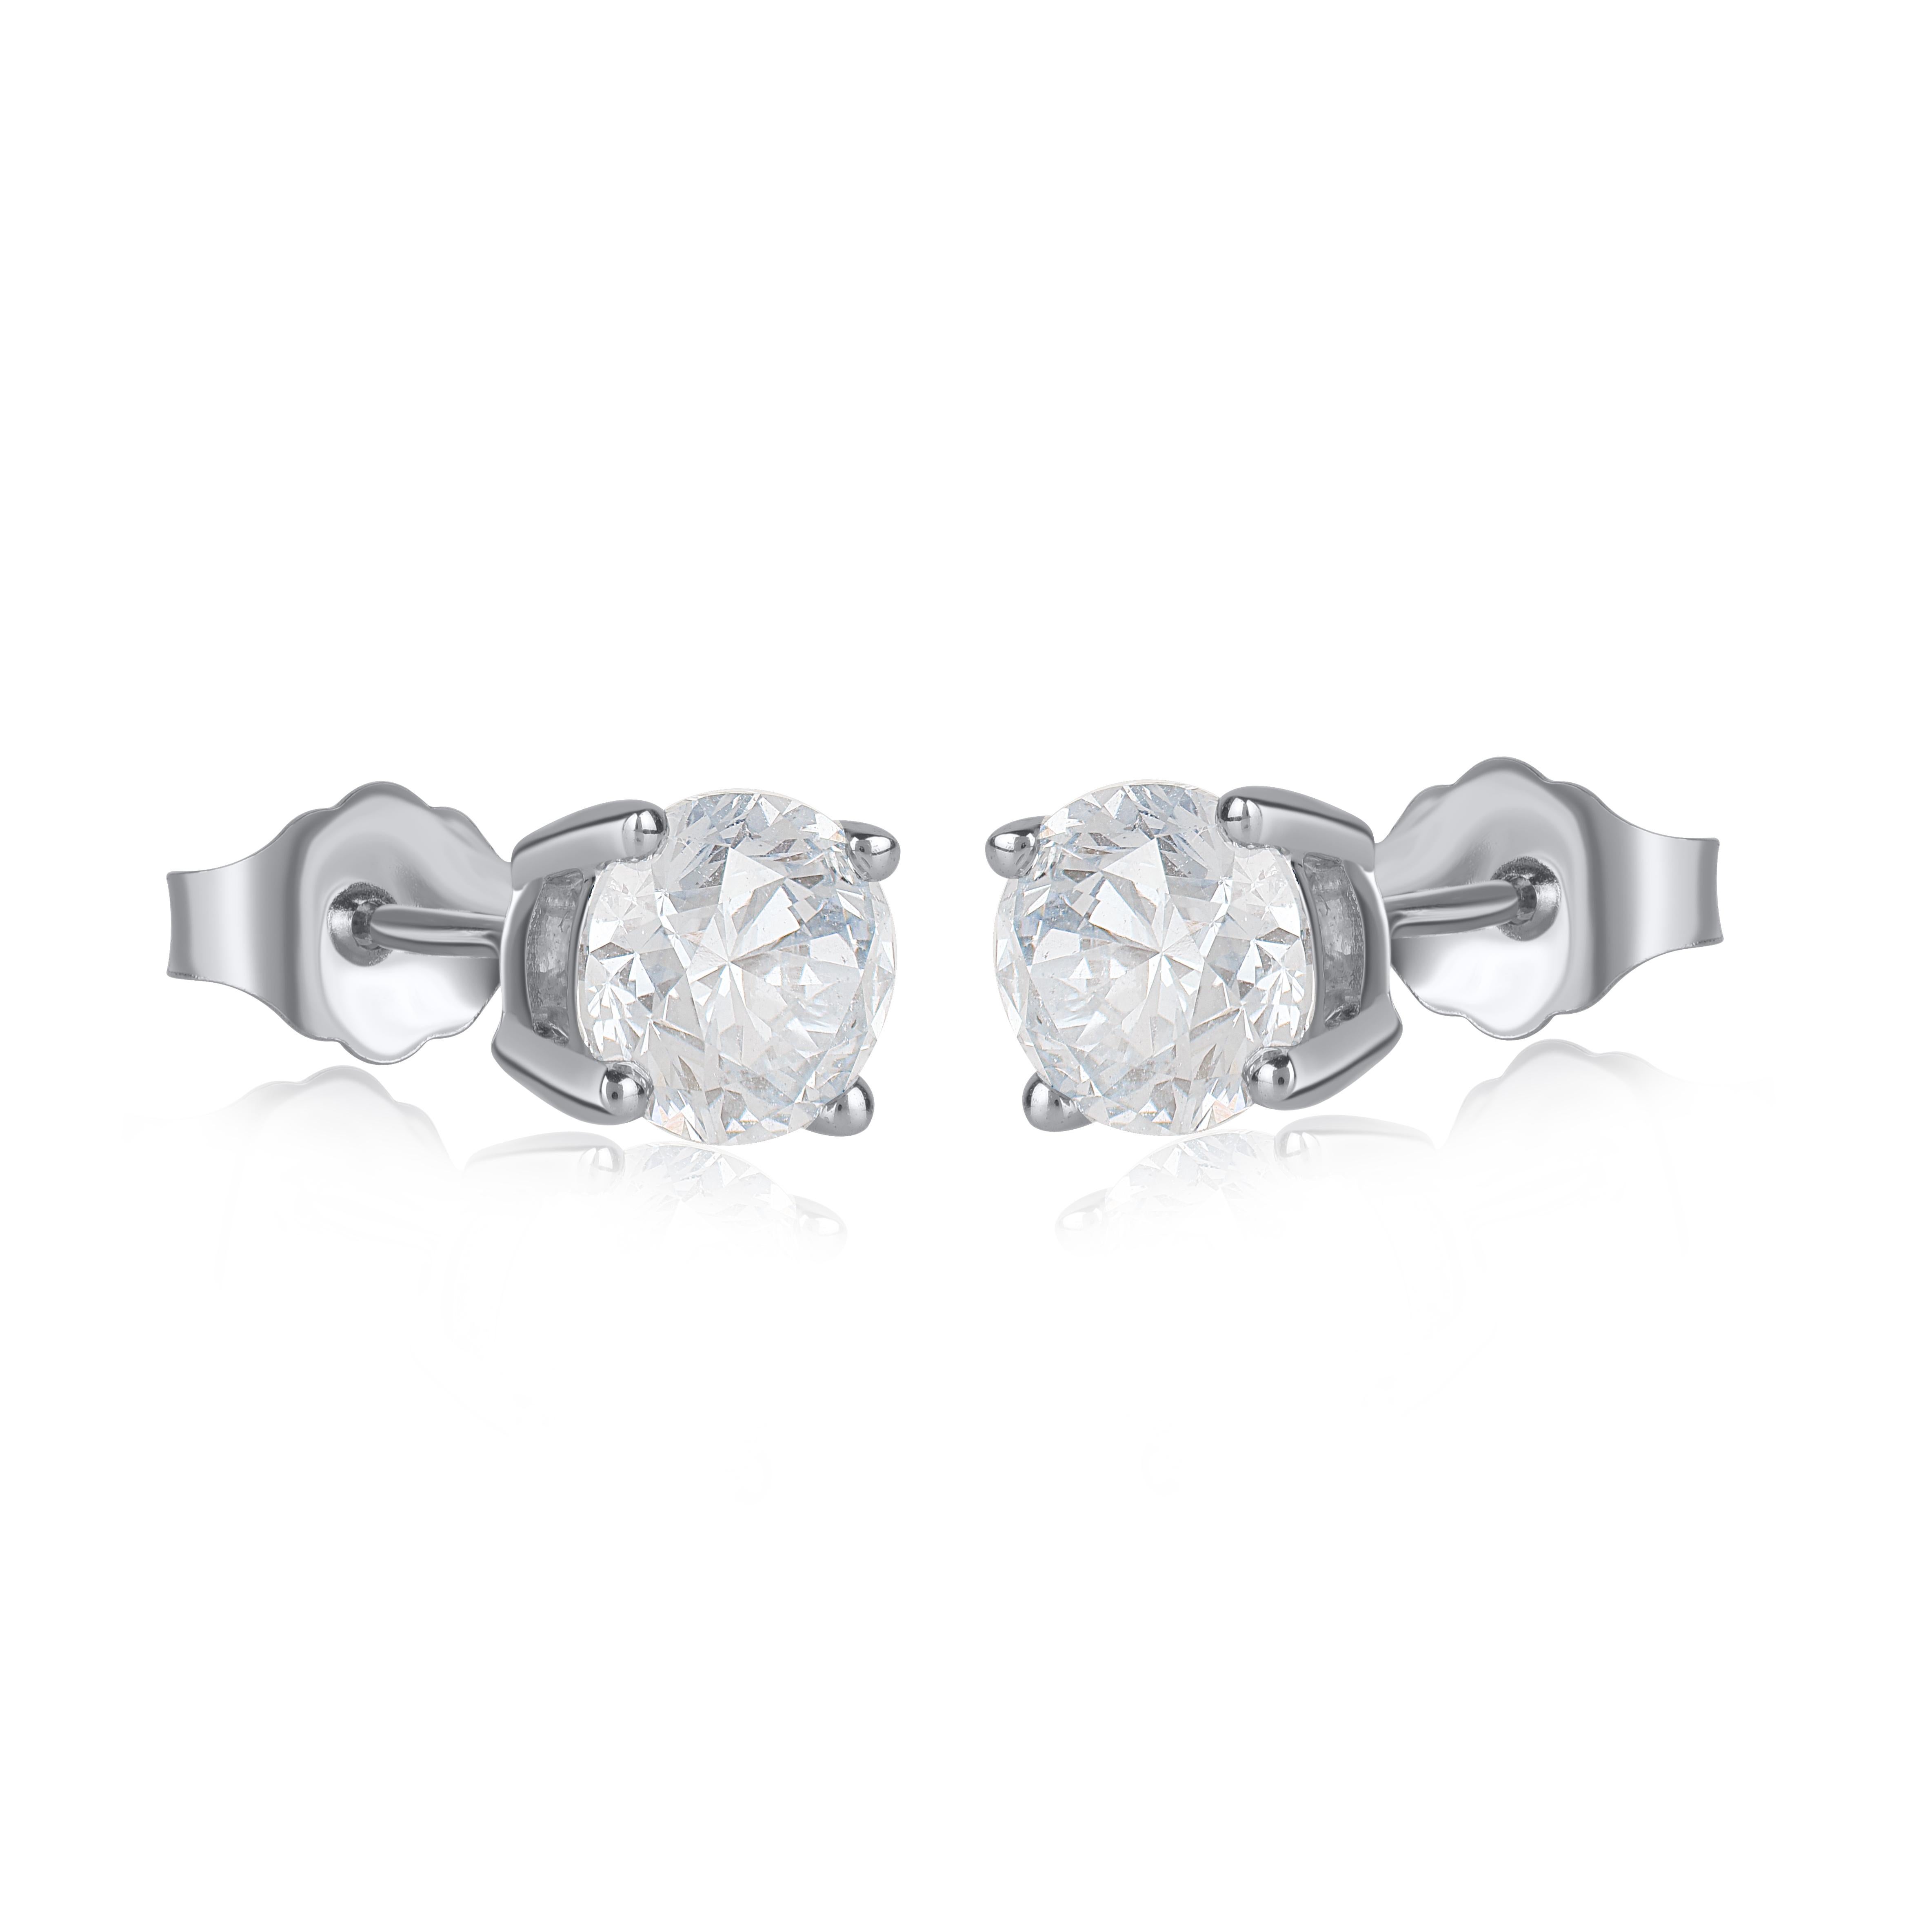 These shimmering and striking diamond stud earrings are perfect for yourself or for gifting to someone special. The Total Diamond Carat weight of the 2 stones is 1.50 CT and each pair of stud earrings comes along with an IGI Certification